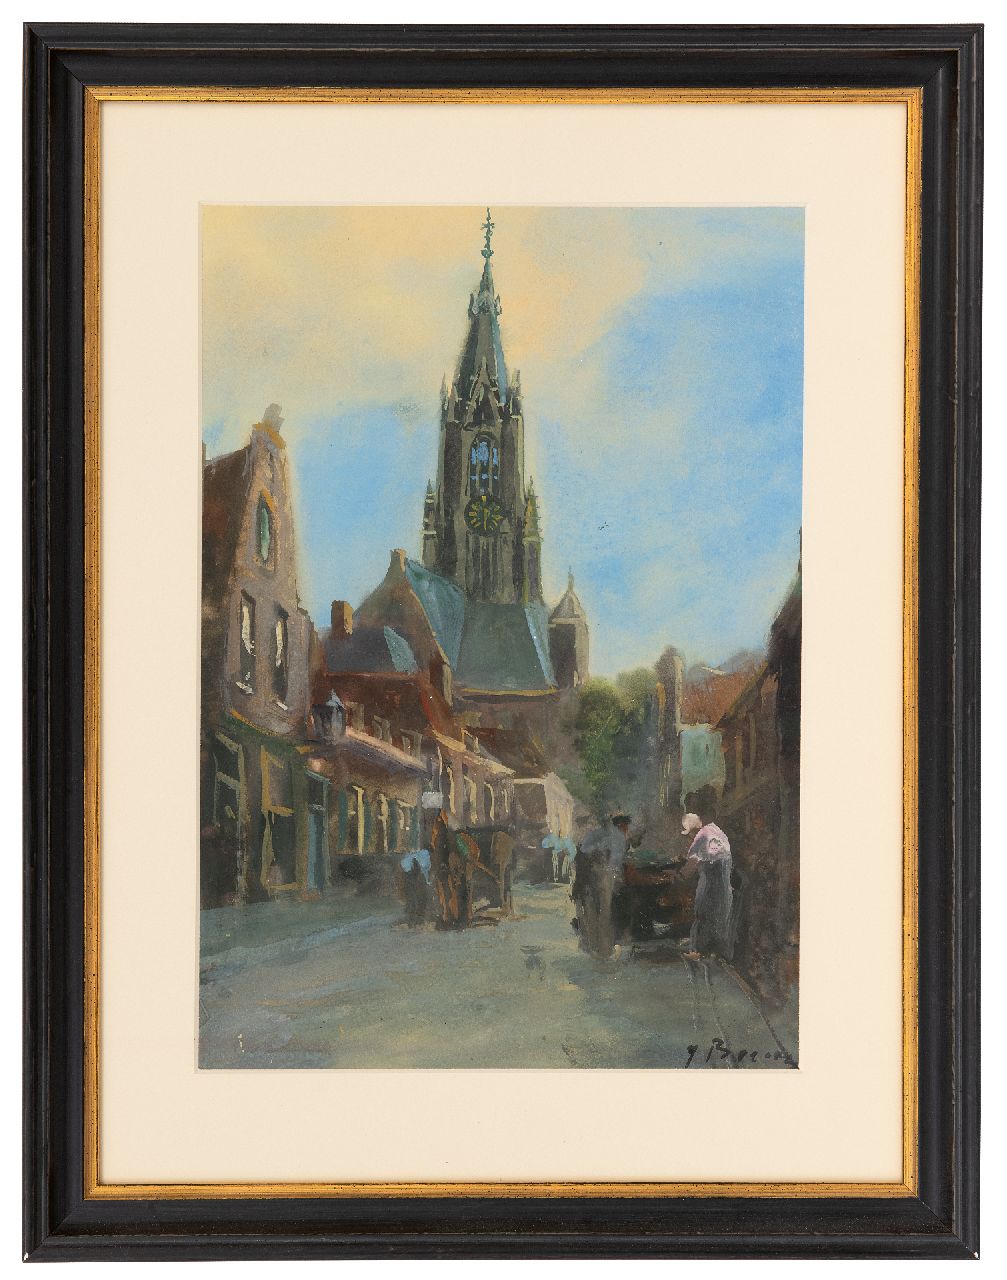 Beertz  J. | J. J. Beertz | Watercolours and drawings offered for sale | A town view with the Nieuwe Kerk of Delft, watercolour on paper 38.3 x 26.6 cm, signed l.r.